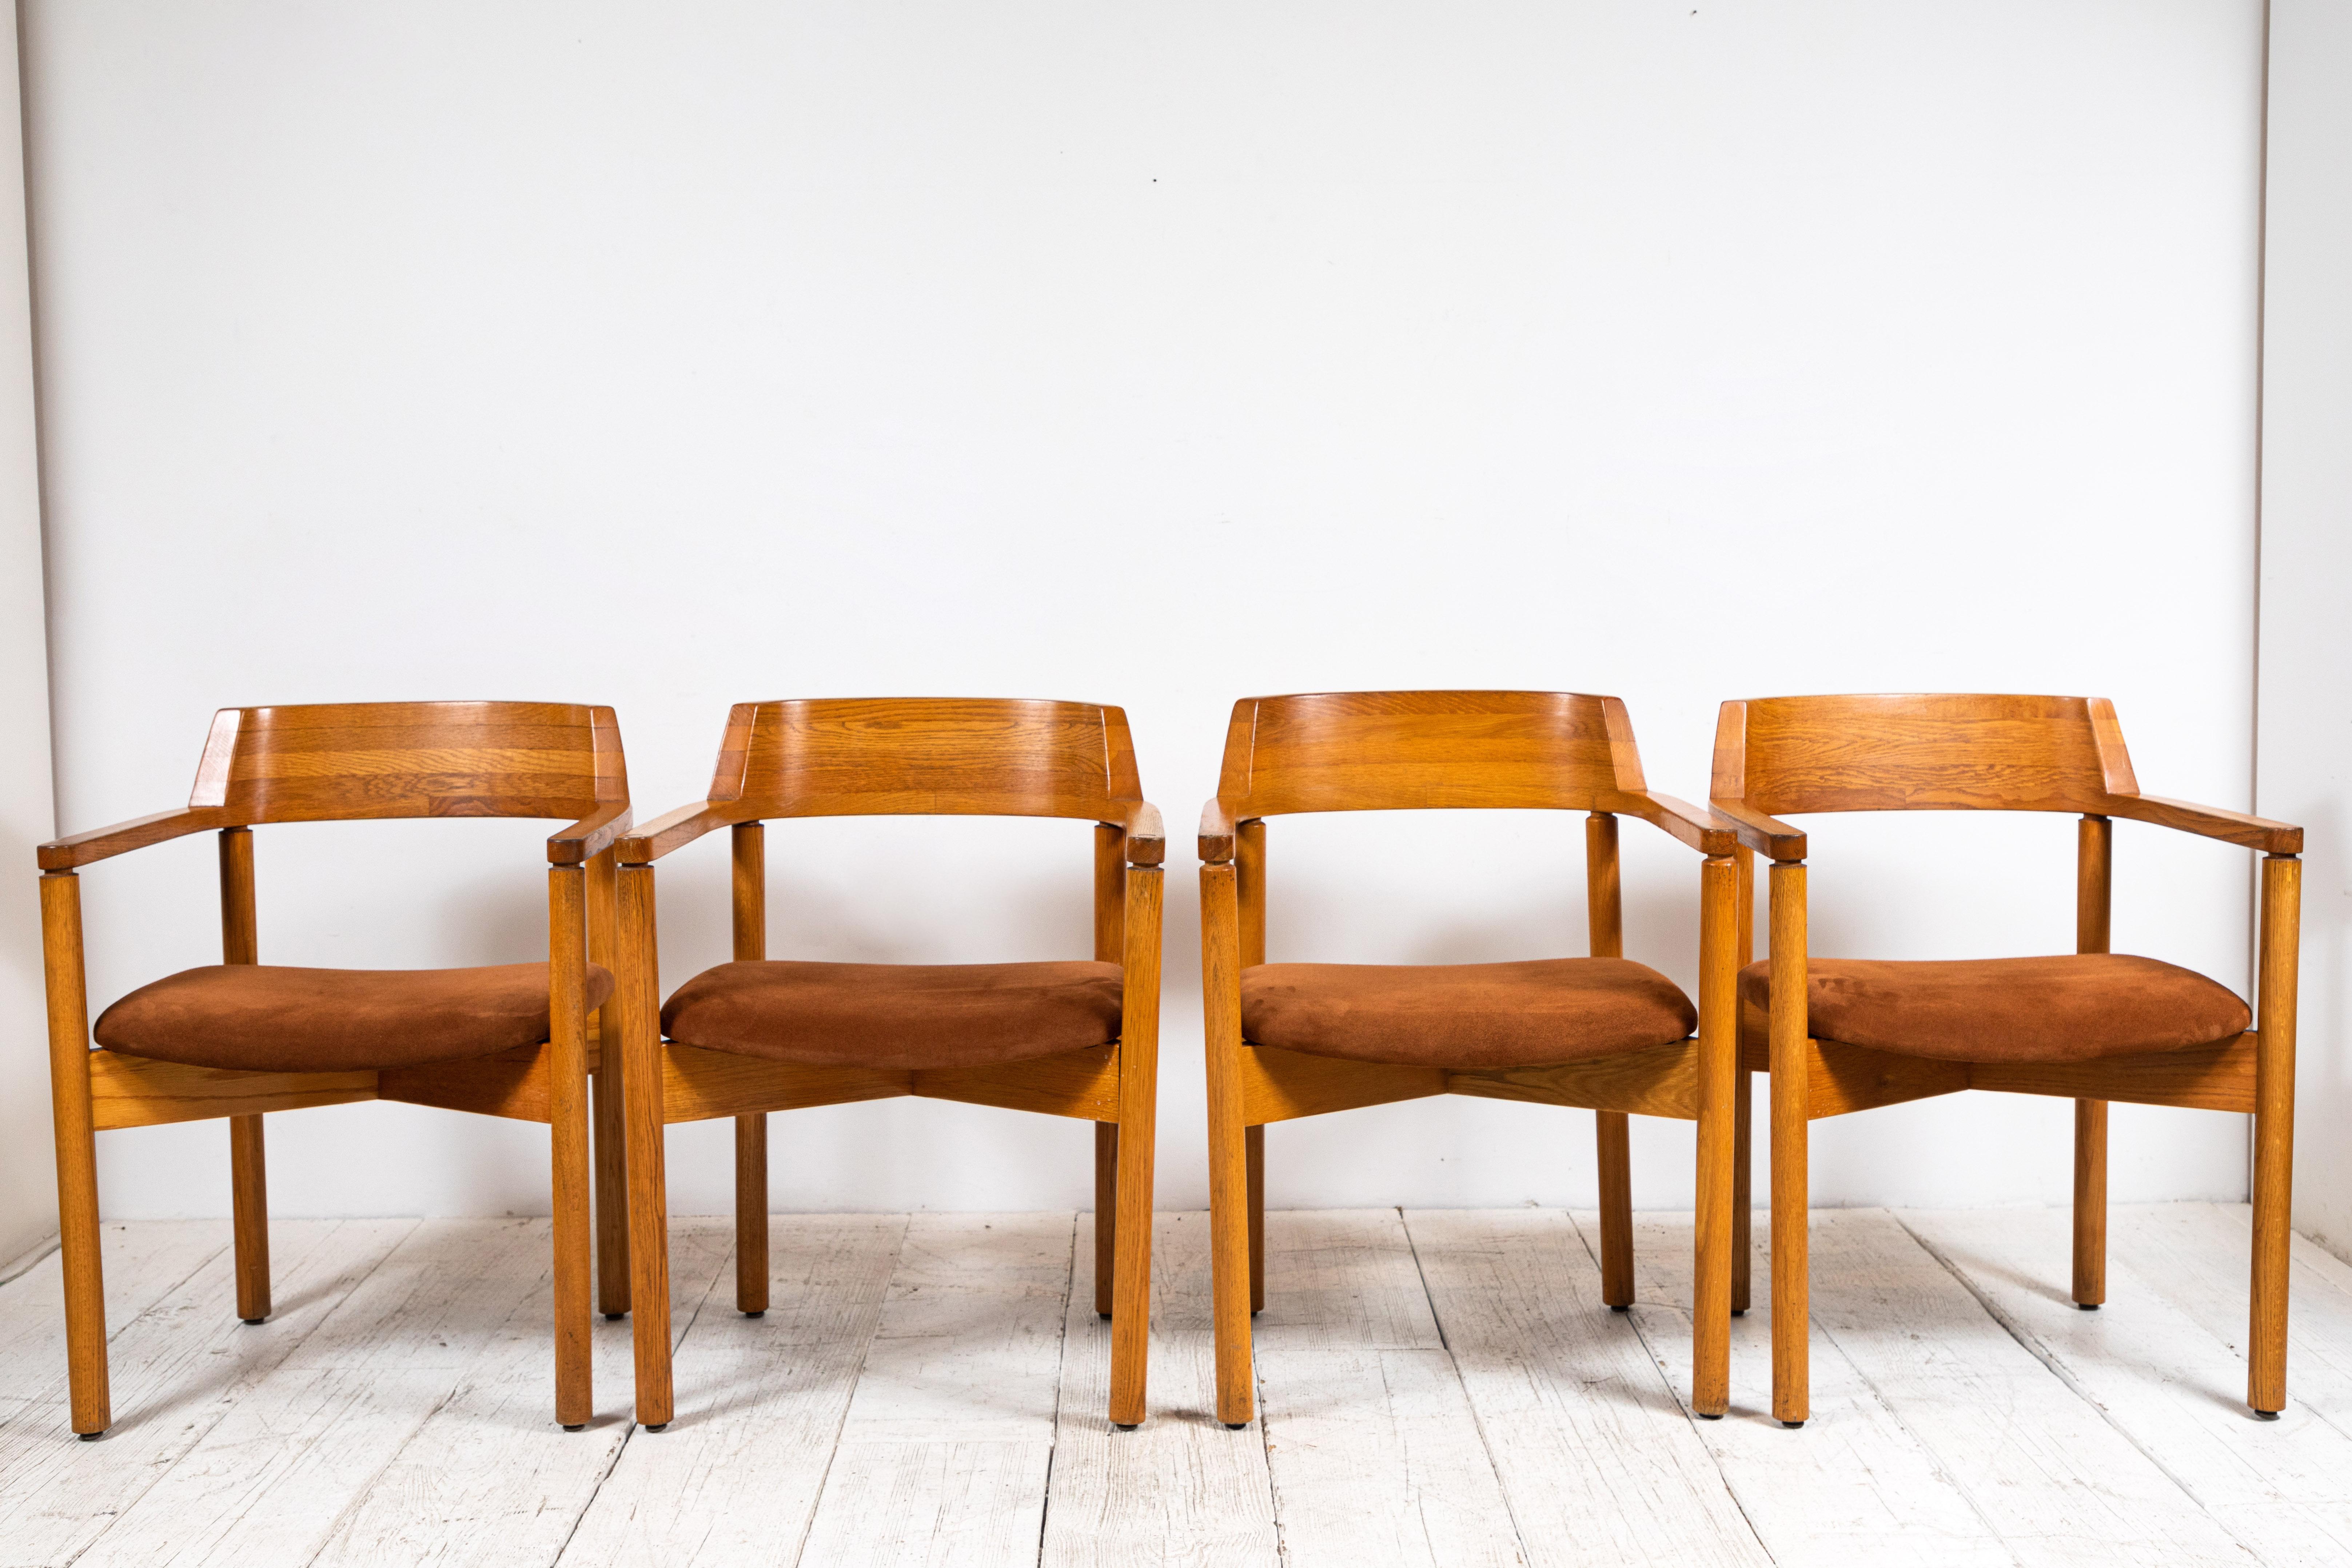 Set of four midcentury dining arm chairs with curved back newly upholstered in brown suede.